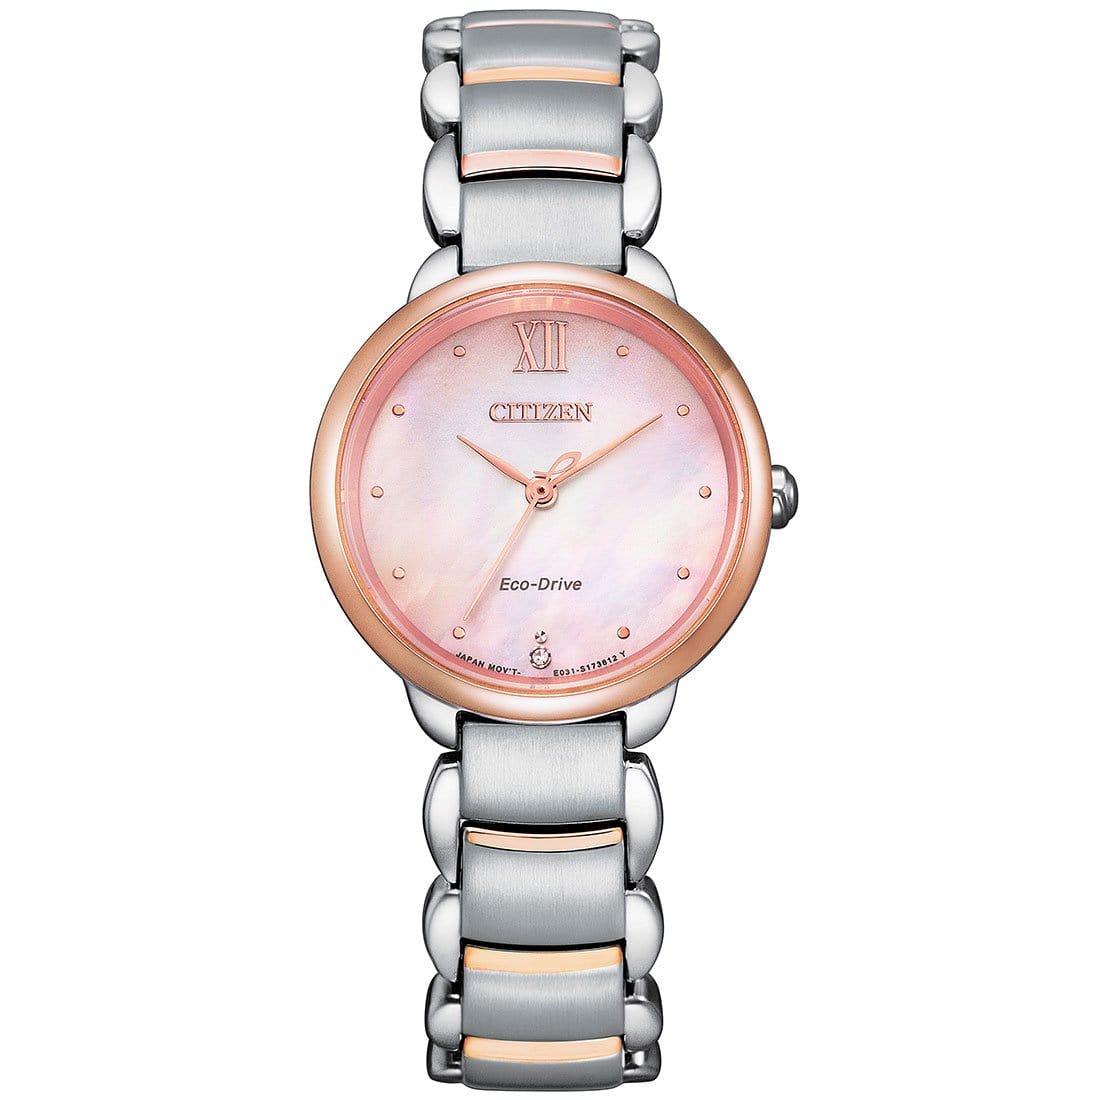 Citizen L Eco-Drive Analog Ladies Mother of Pearl Dial Dress Watch EM0924-85Y